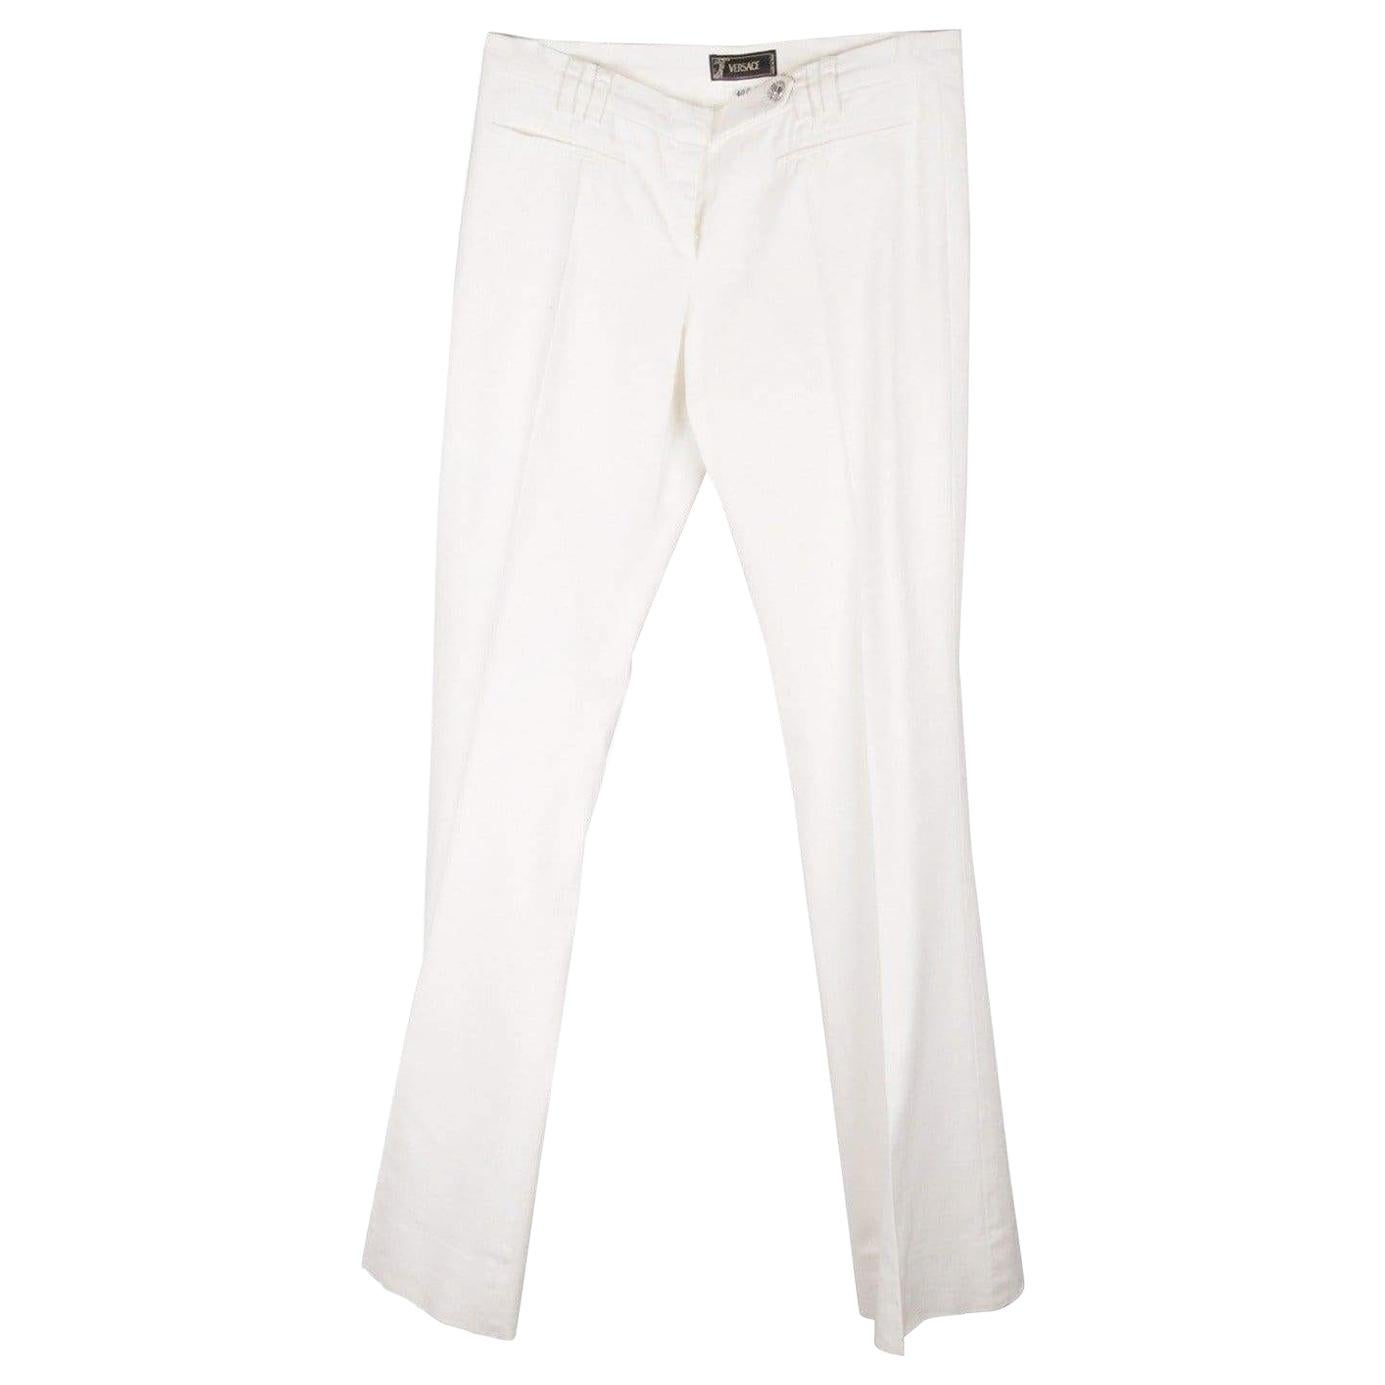 Versace Flared Women Trousers Pants Size 40